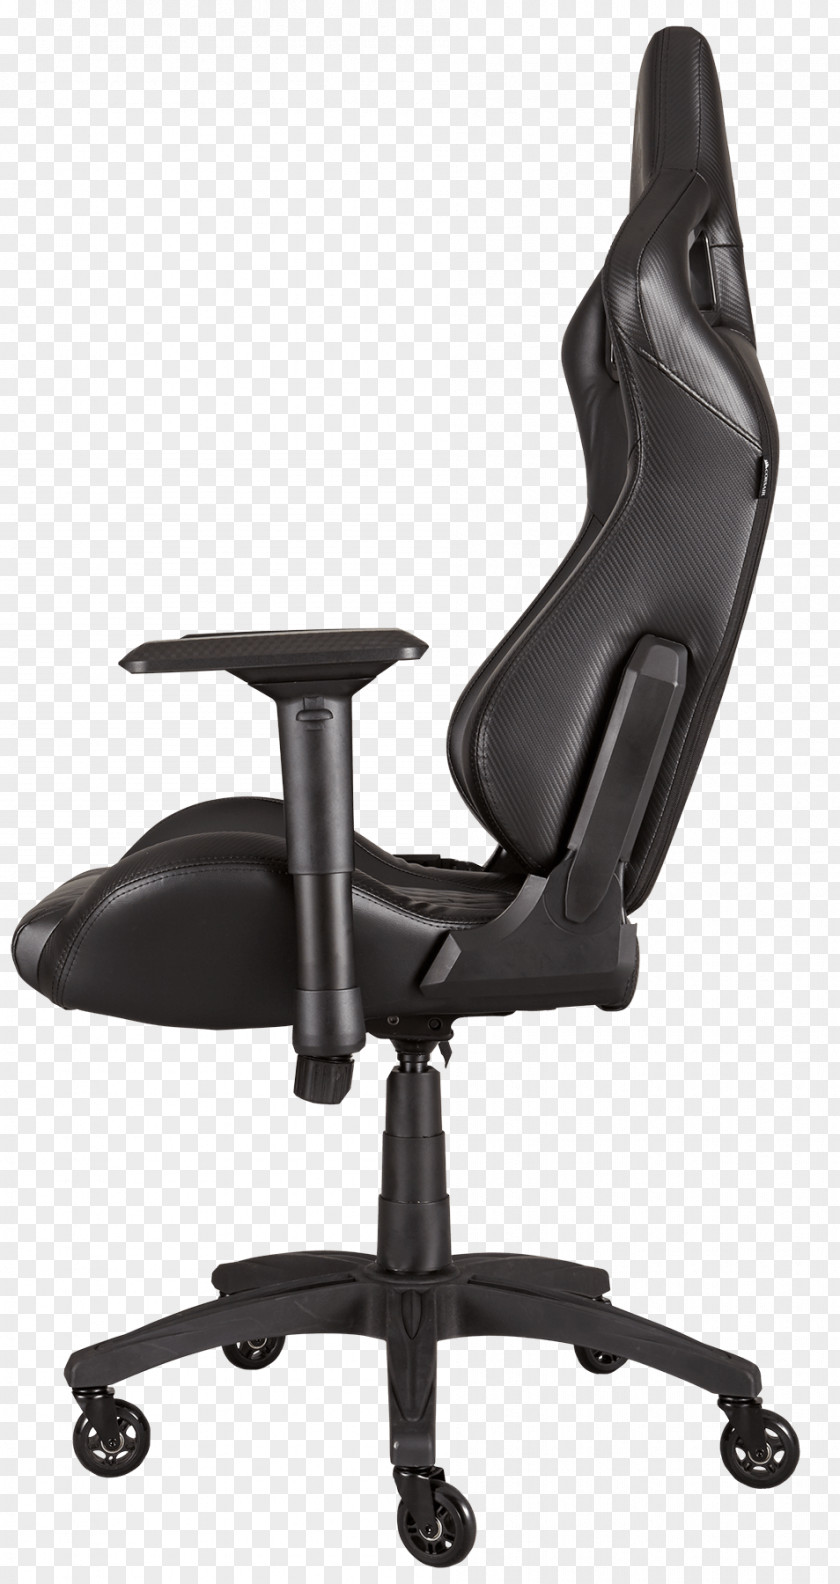 Office Chair & Desk Chairs Furniture Seat Caster PNG